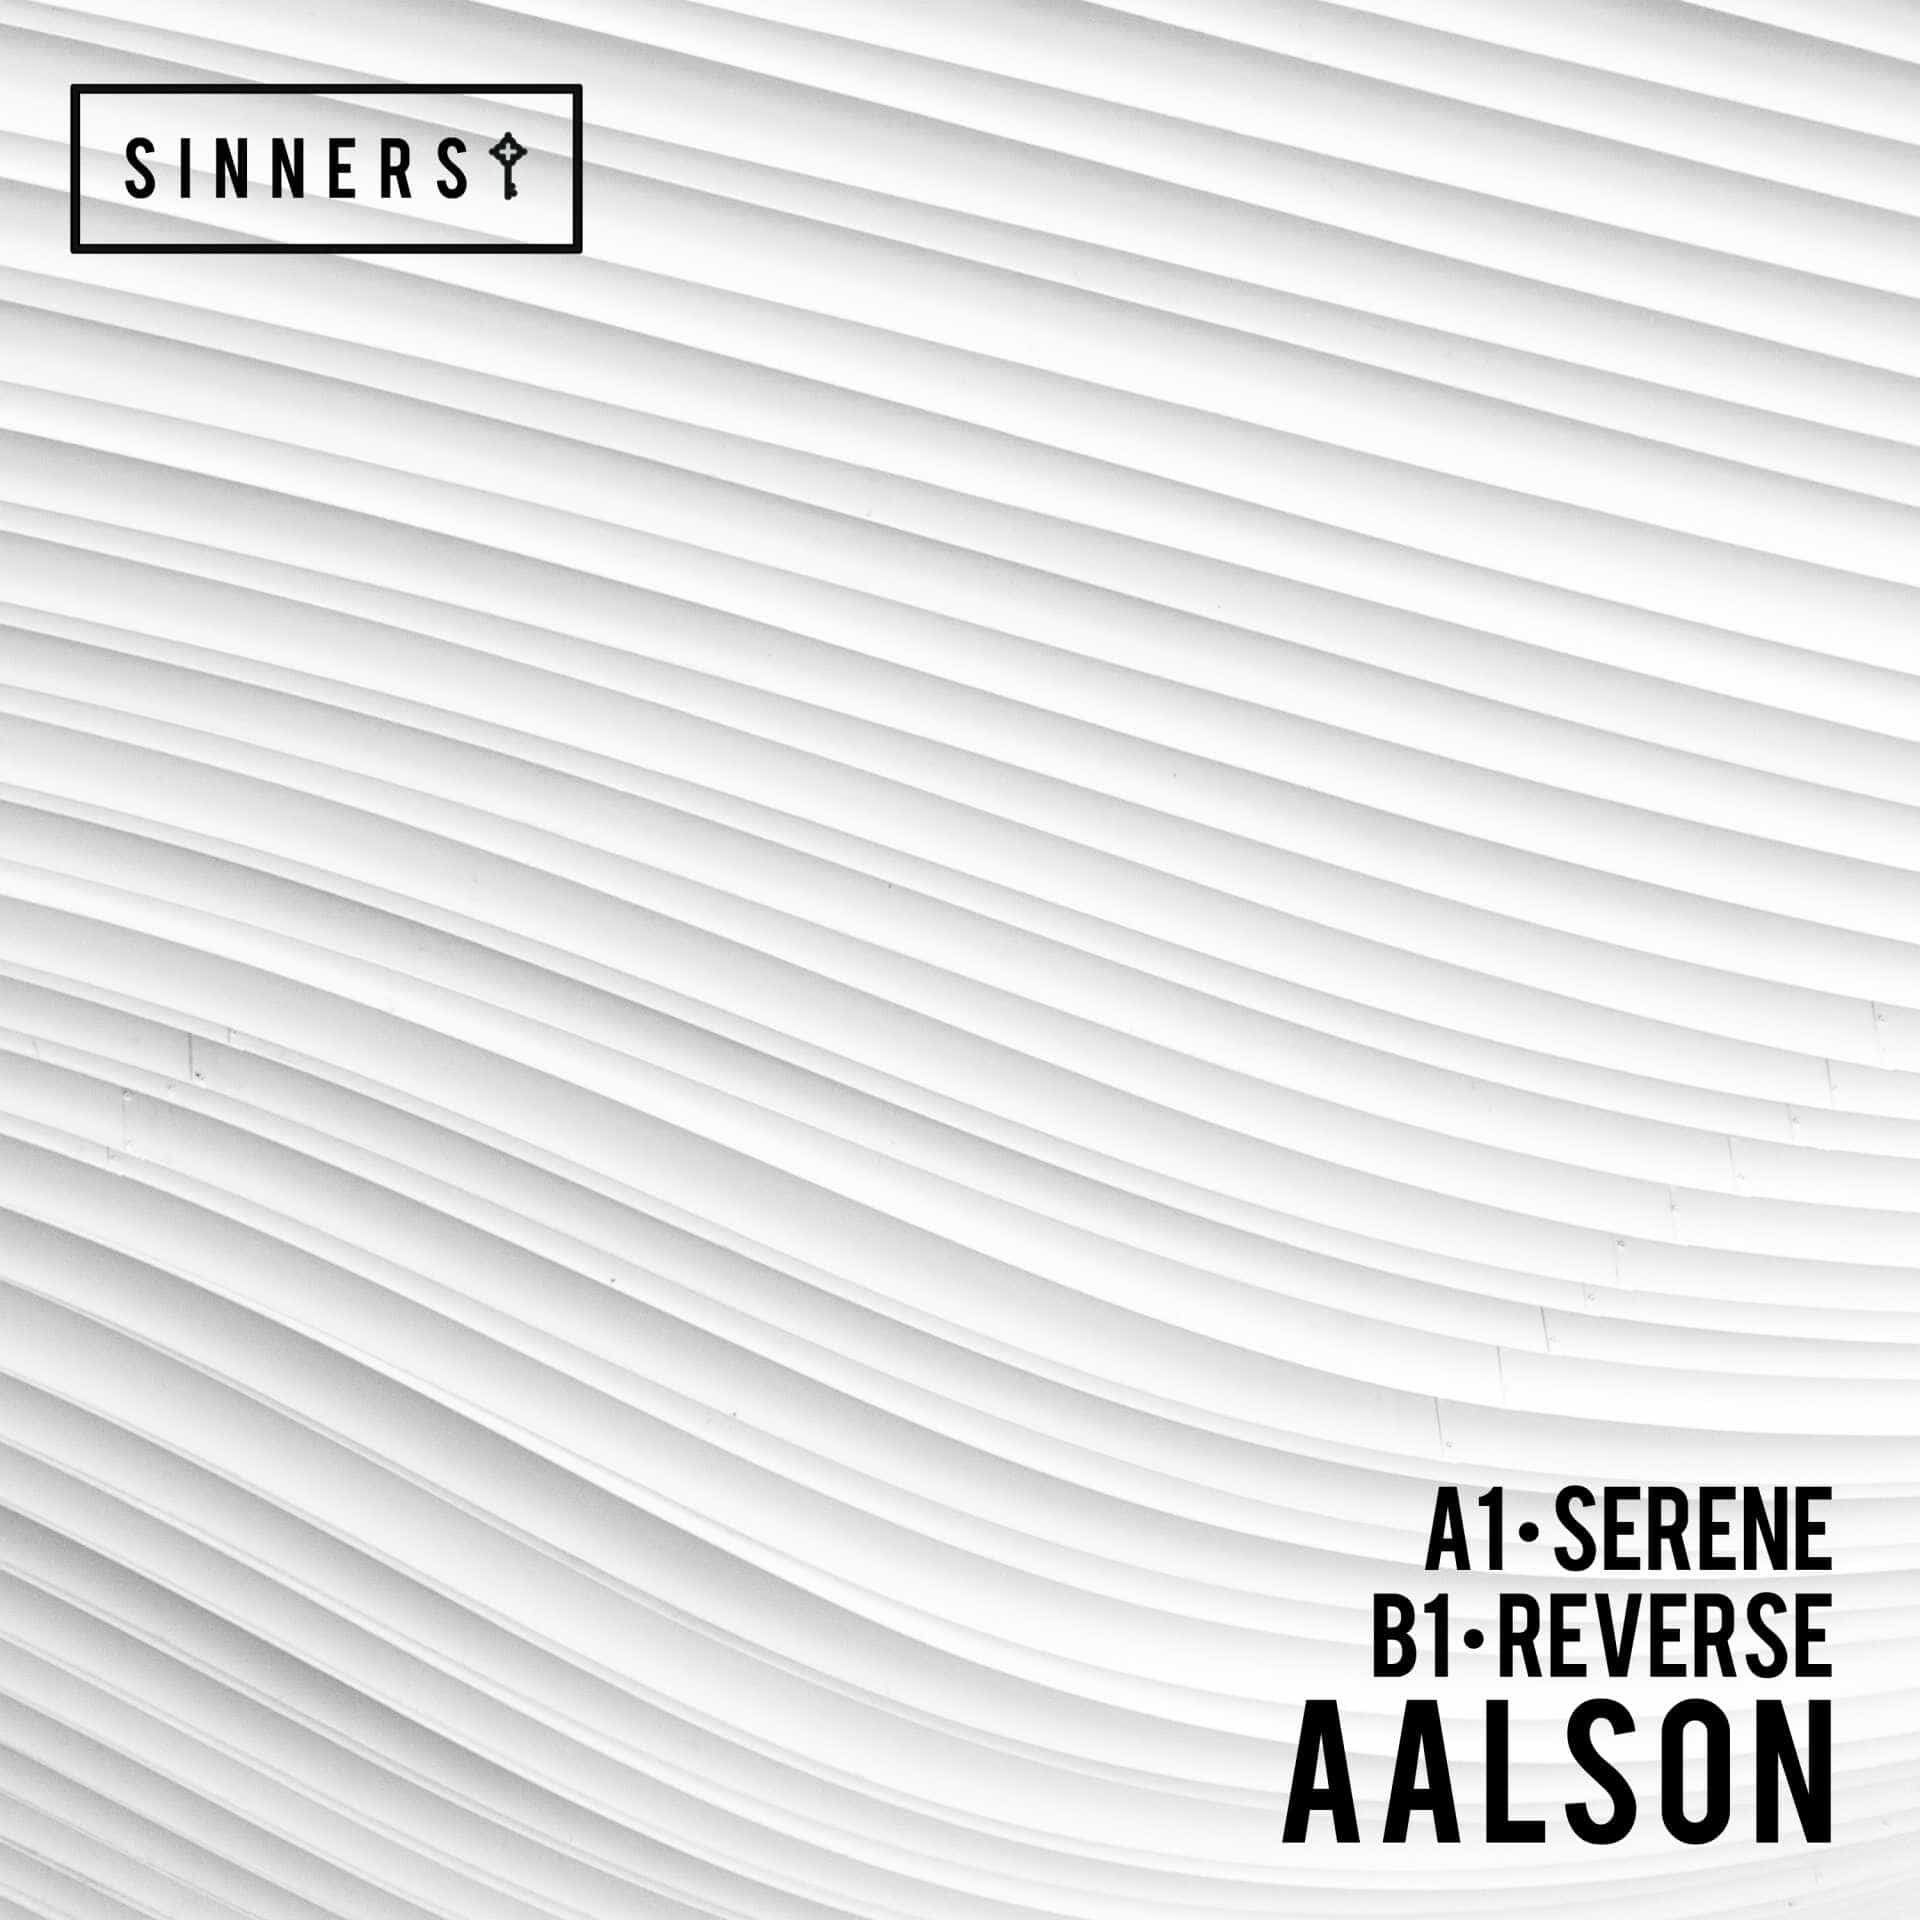 The artwork for the single Serene EP by Aalson